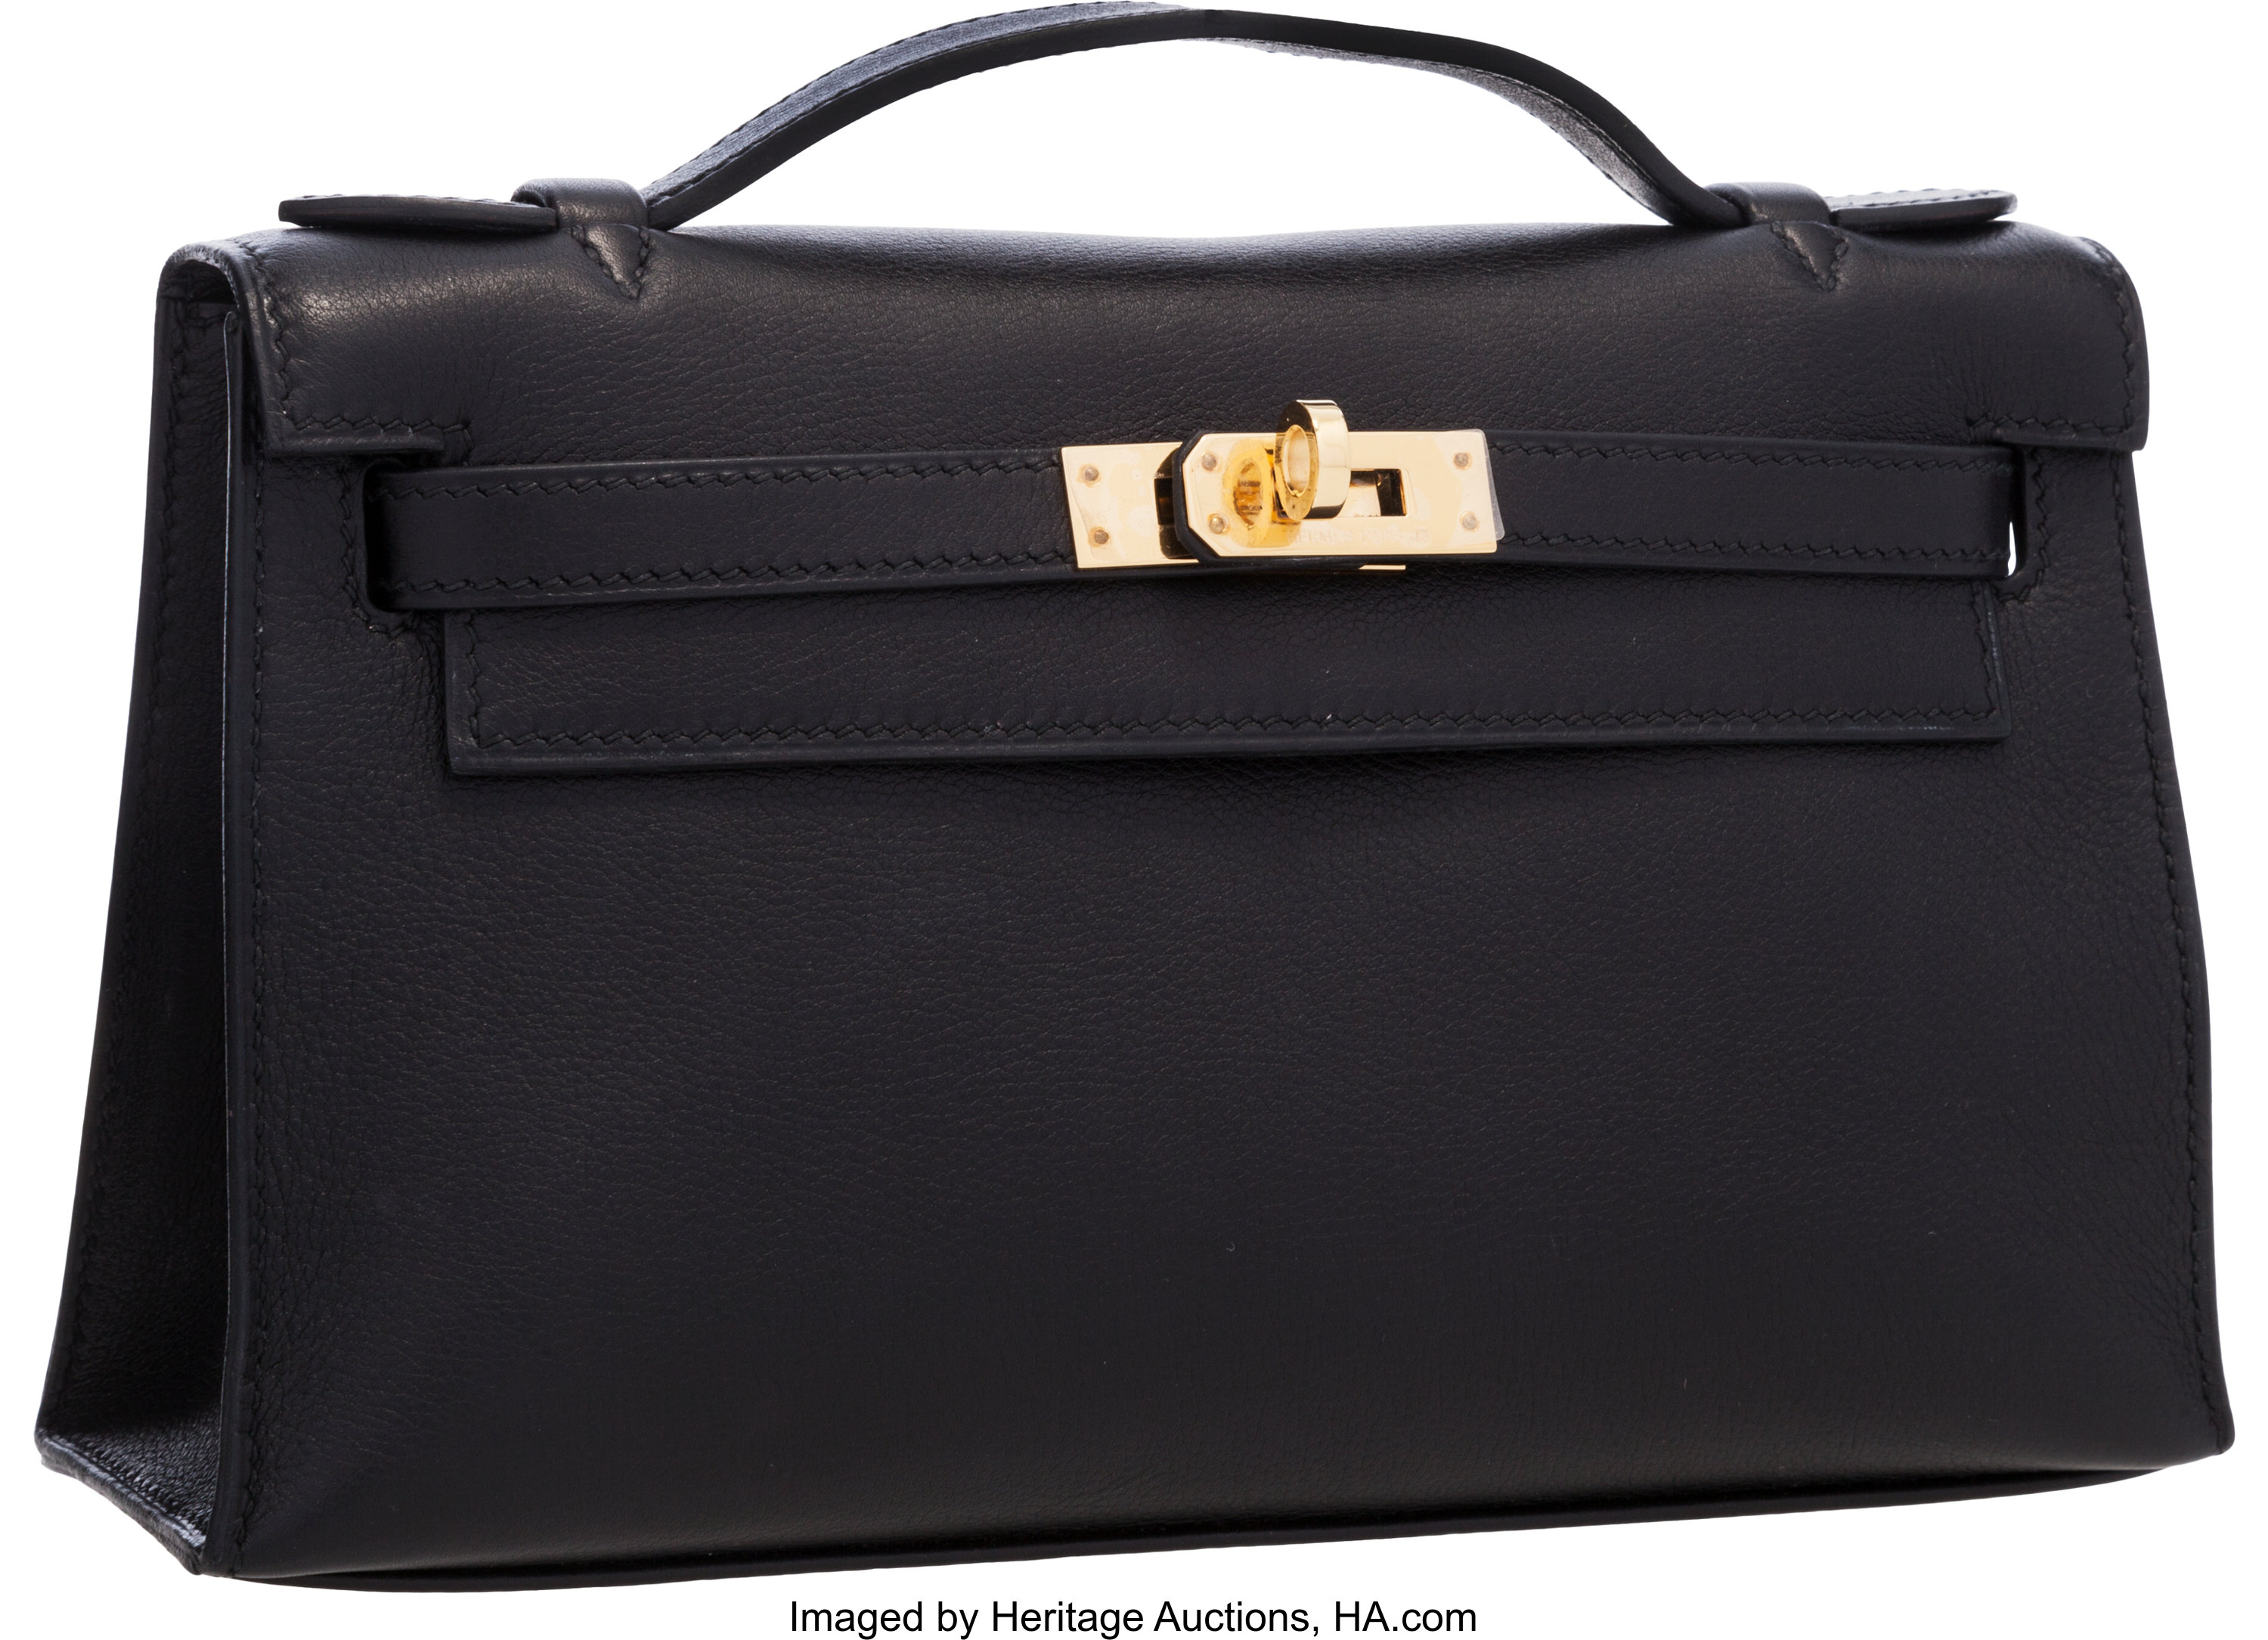 At Auction: Hermes Kelly Handbag Rouge Vif Ardennes with Gold